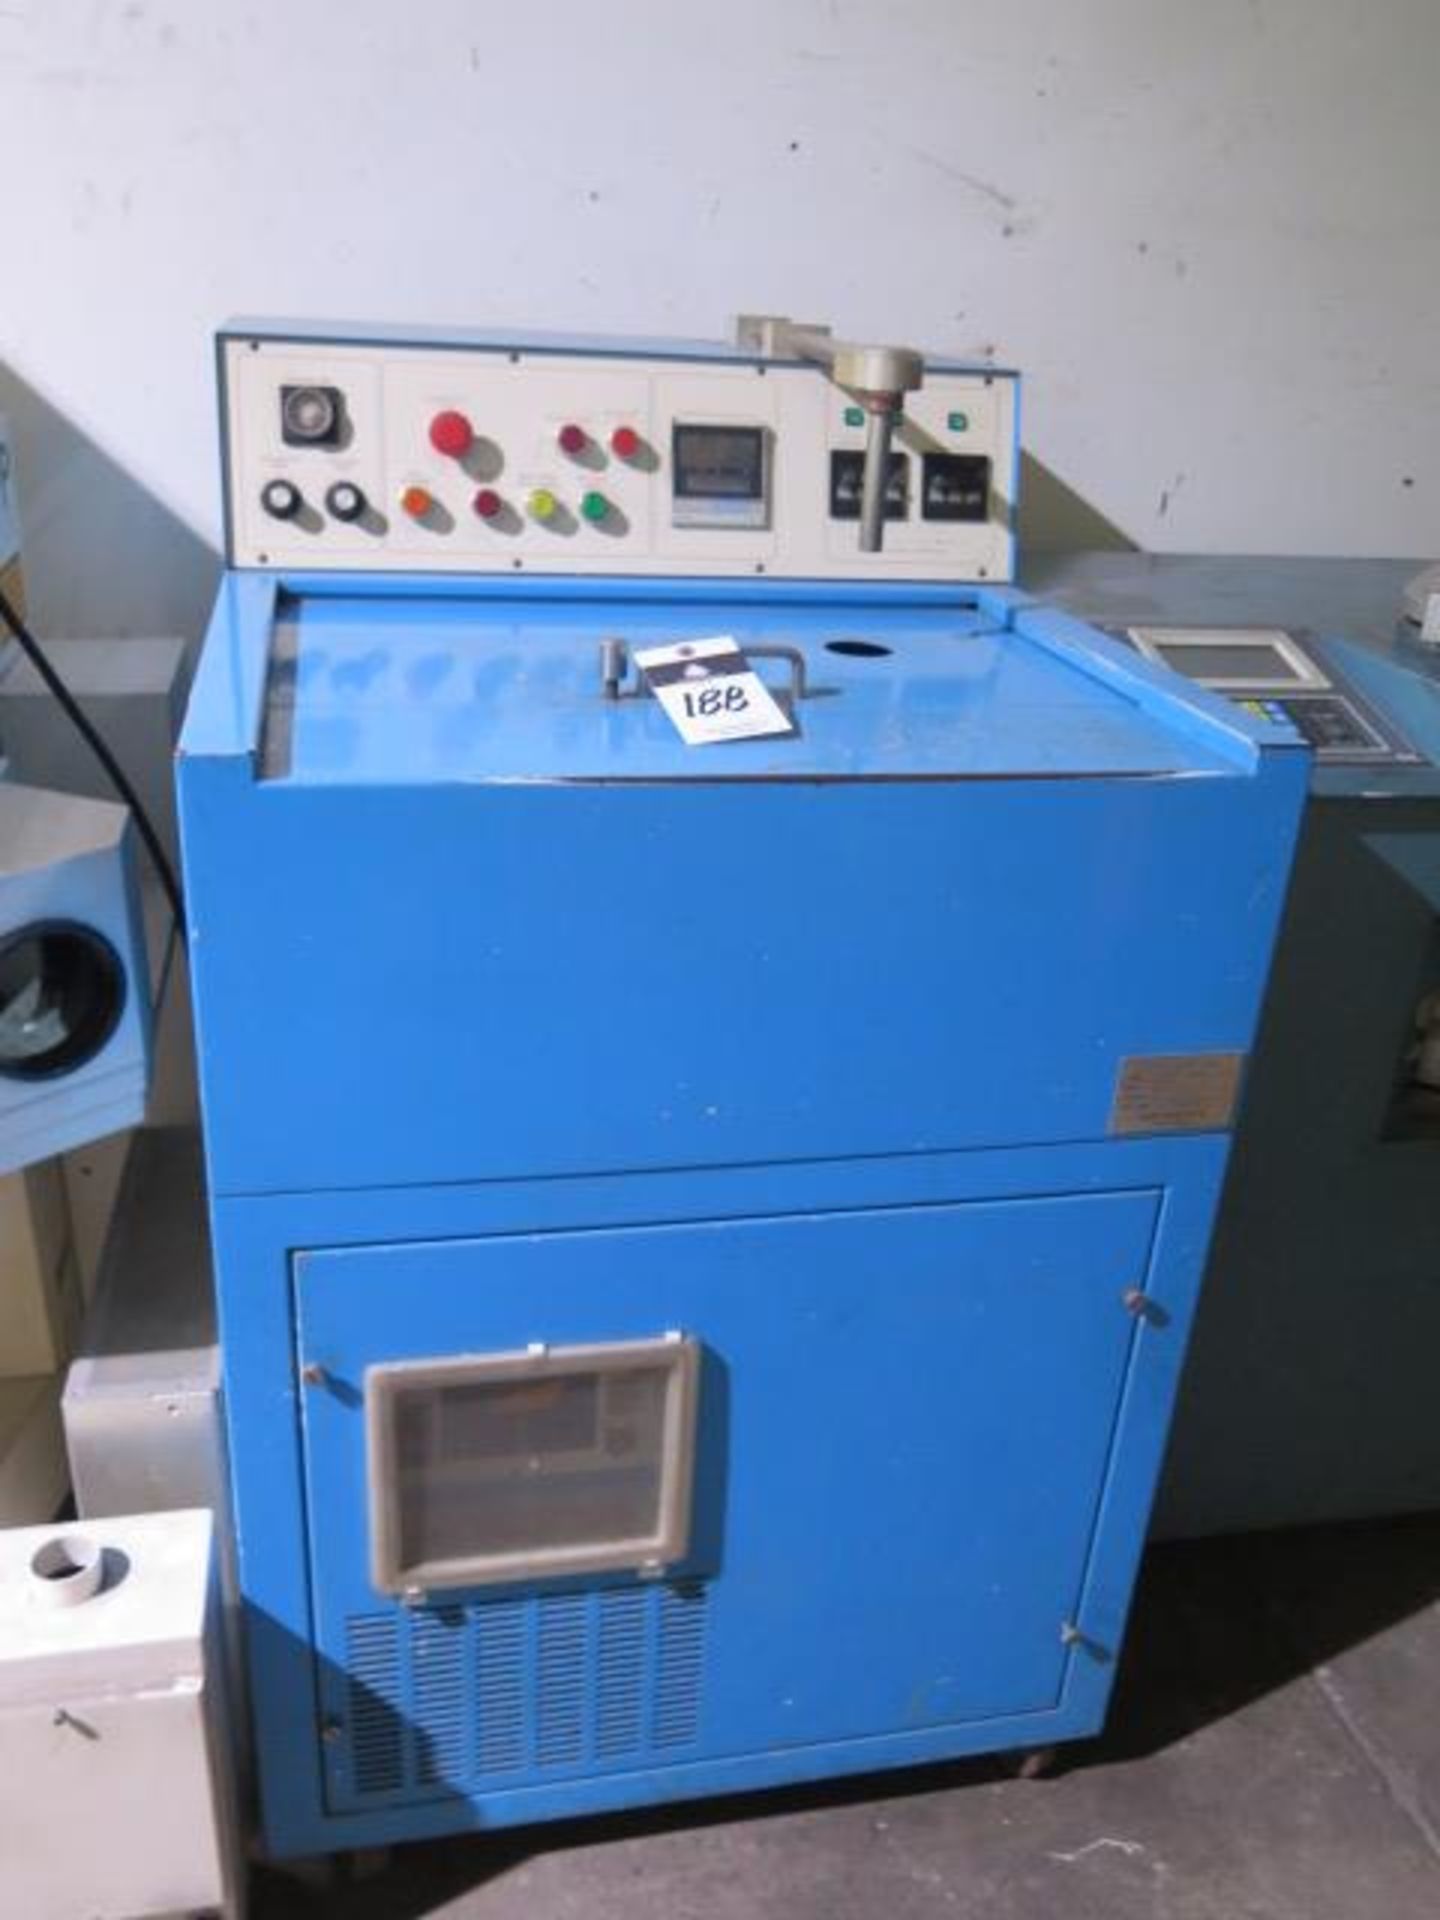 1999 Tanabe Kenden type TCP-3300 Platinum Casting Furnace s/n 9906 w/ 60KHz 7kW Output